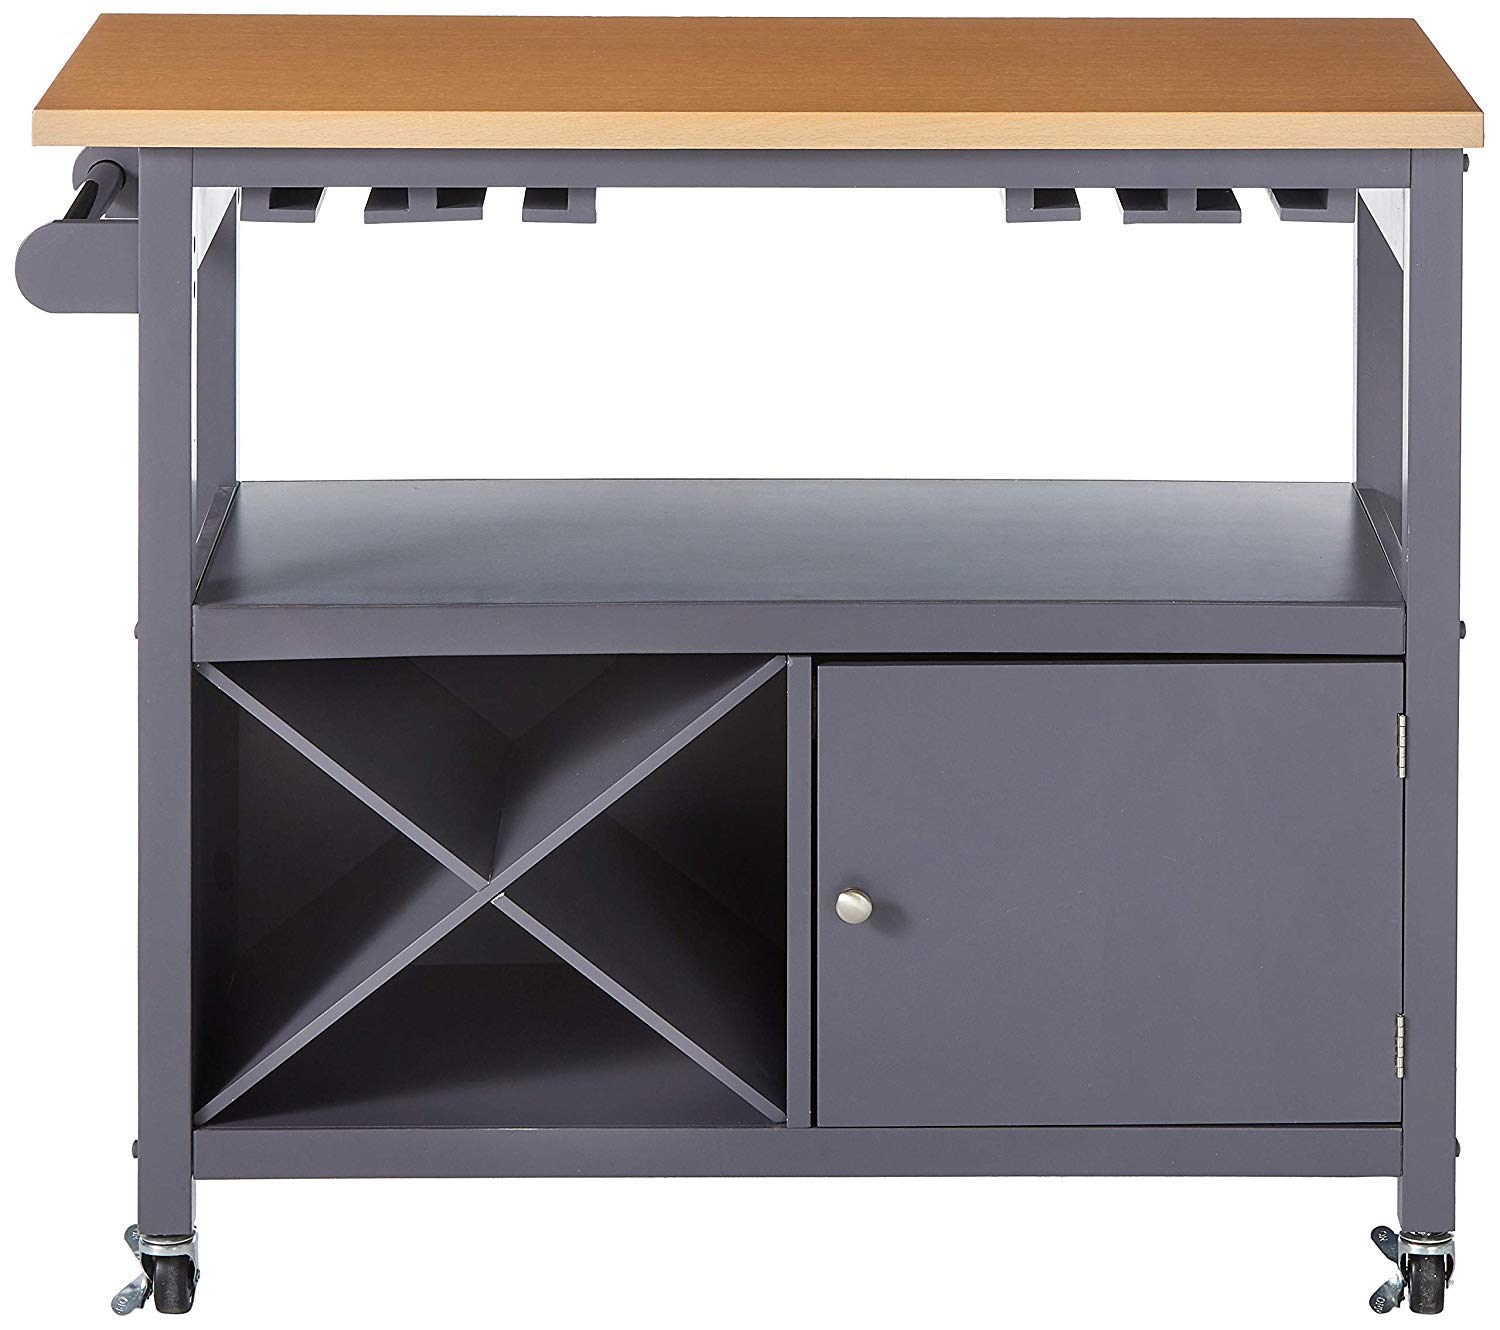 Jose Portable Kitchen Island Serving Cart With Storage Cabinet & Wine Rack, Gray & Natural Wood, Transitional - image 3 of 7